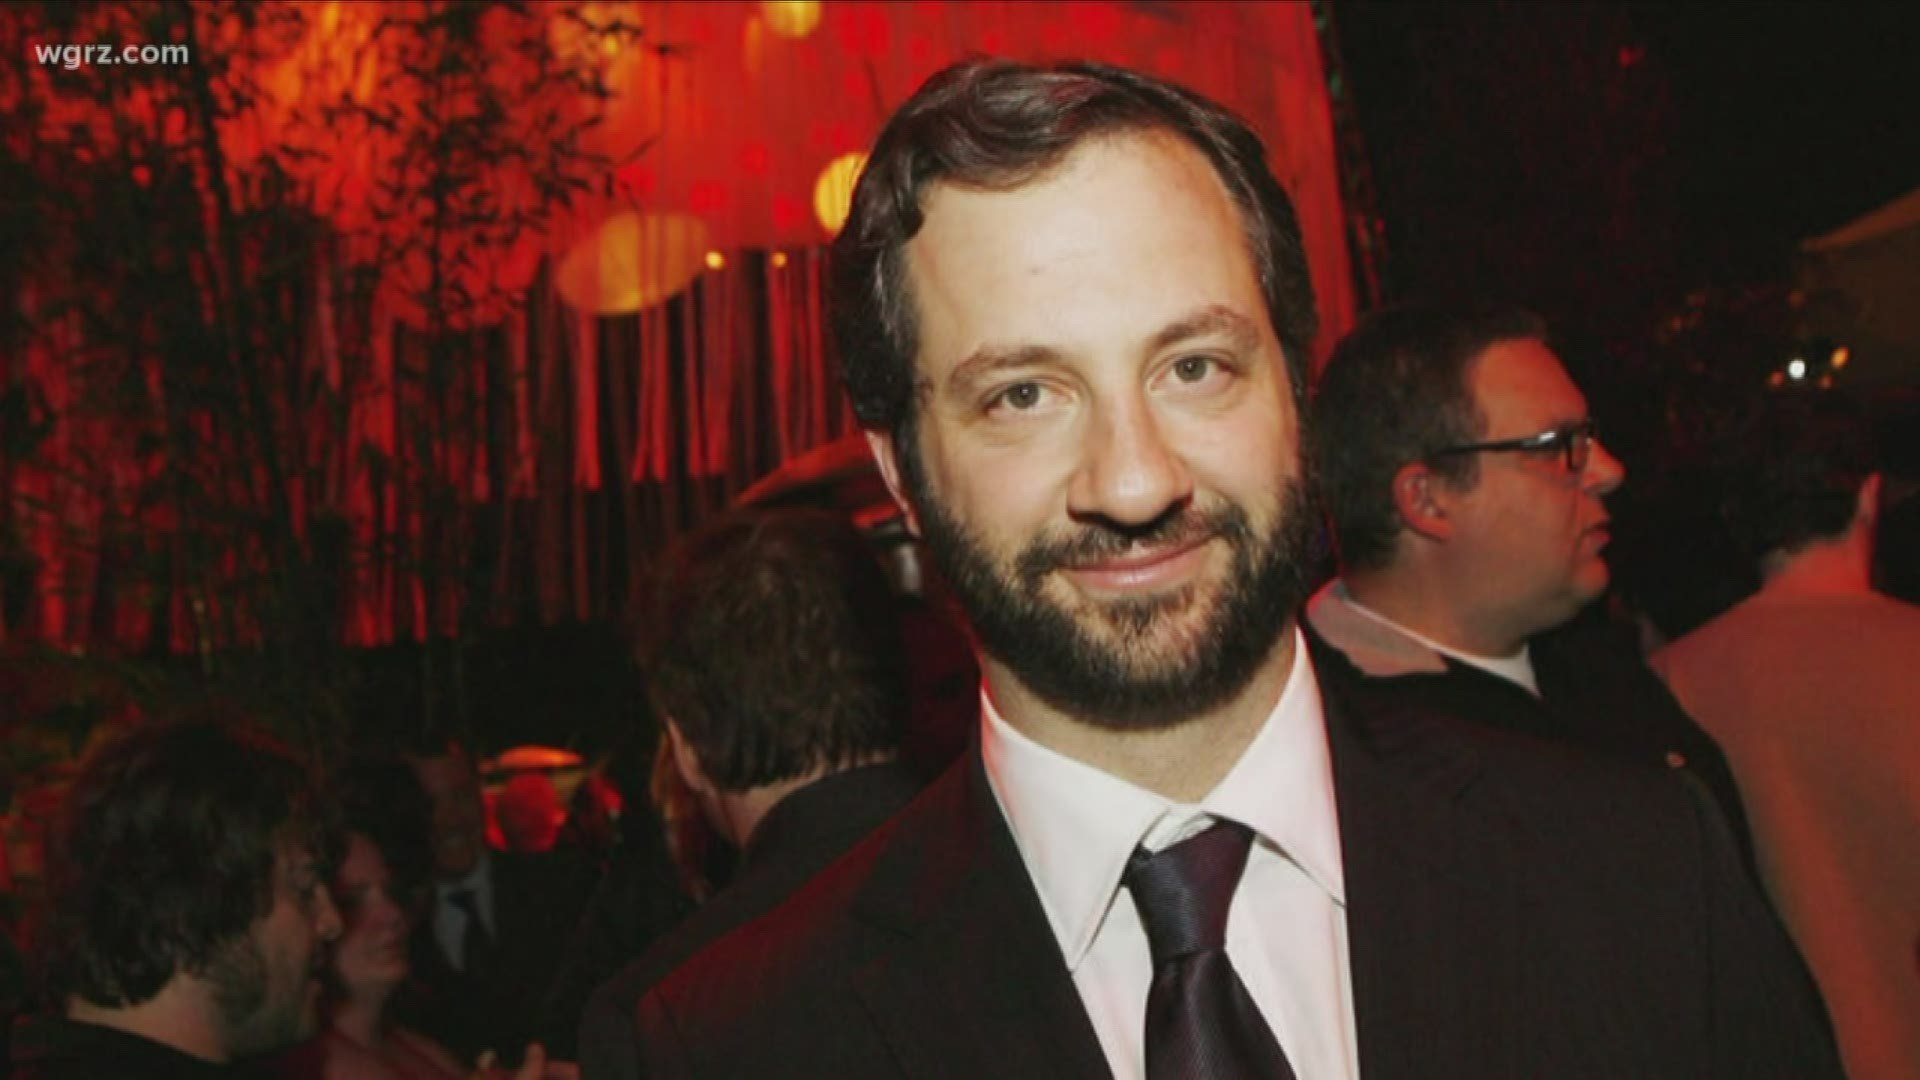 First John Krasinski, then Guillermo Del Toro and now Judd Apatow is the latest Hollywood heavyweight to bring his next block-buster to Buffalo.